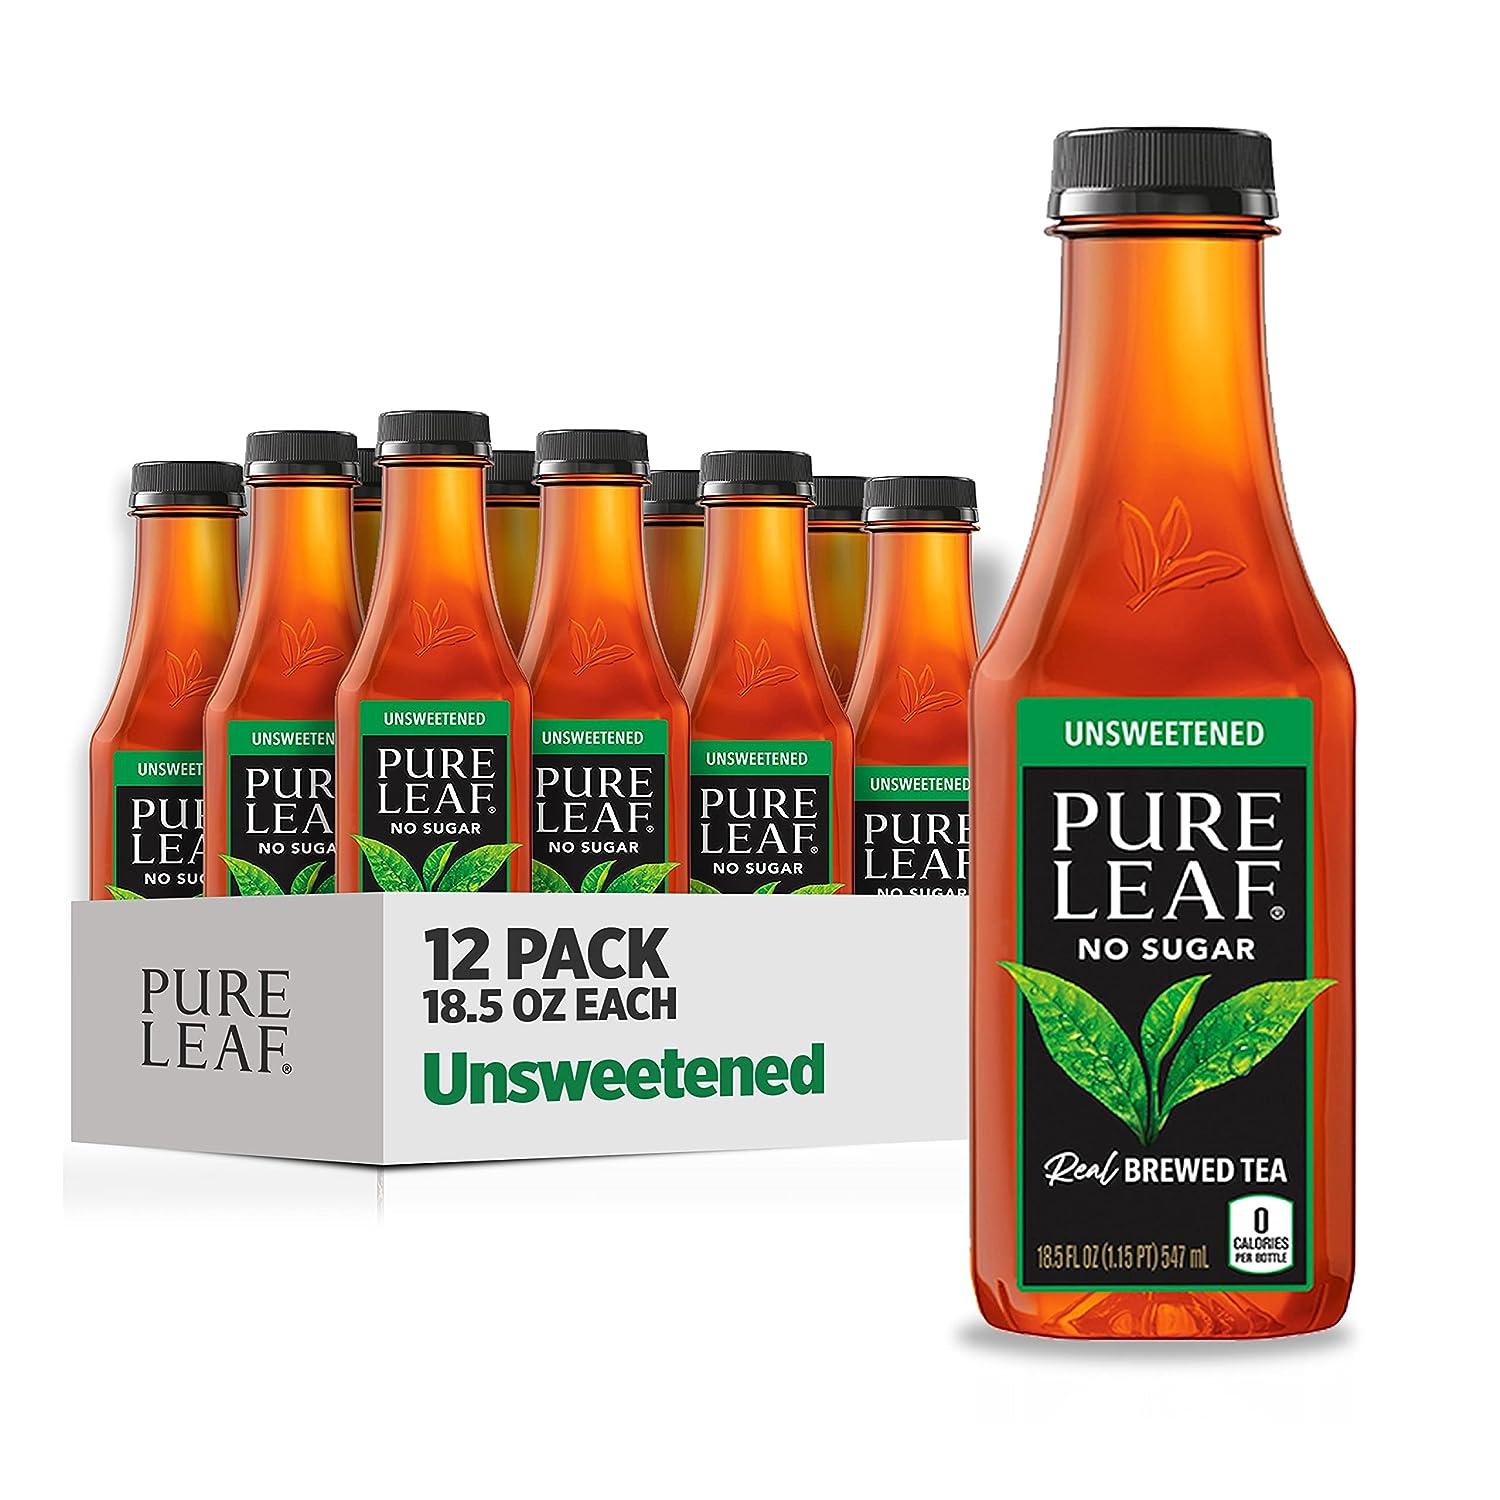 Pure Leaf Iced Tea, Unsweetened Real Brewed Tea 12 Pack for $11.38